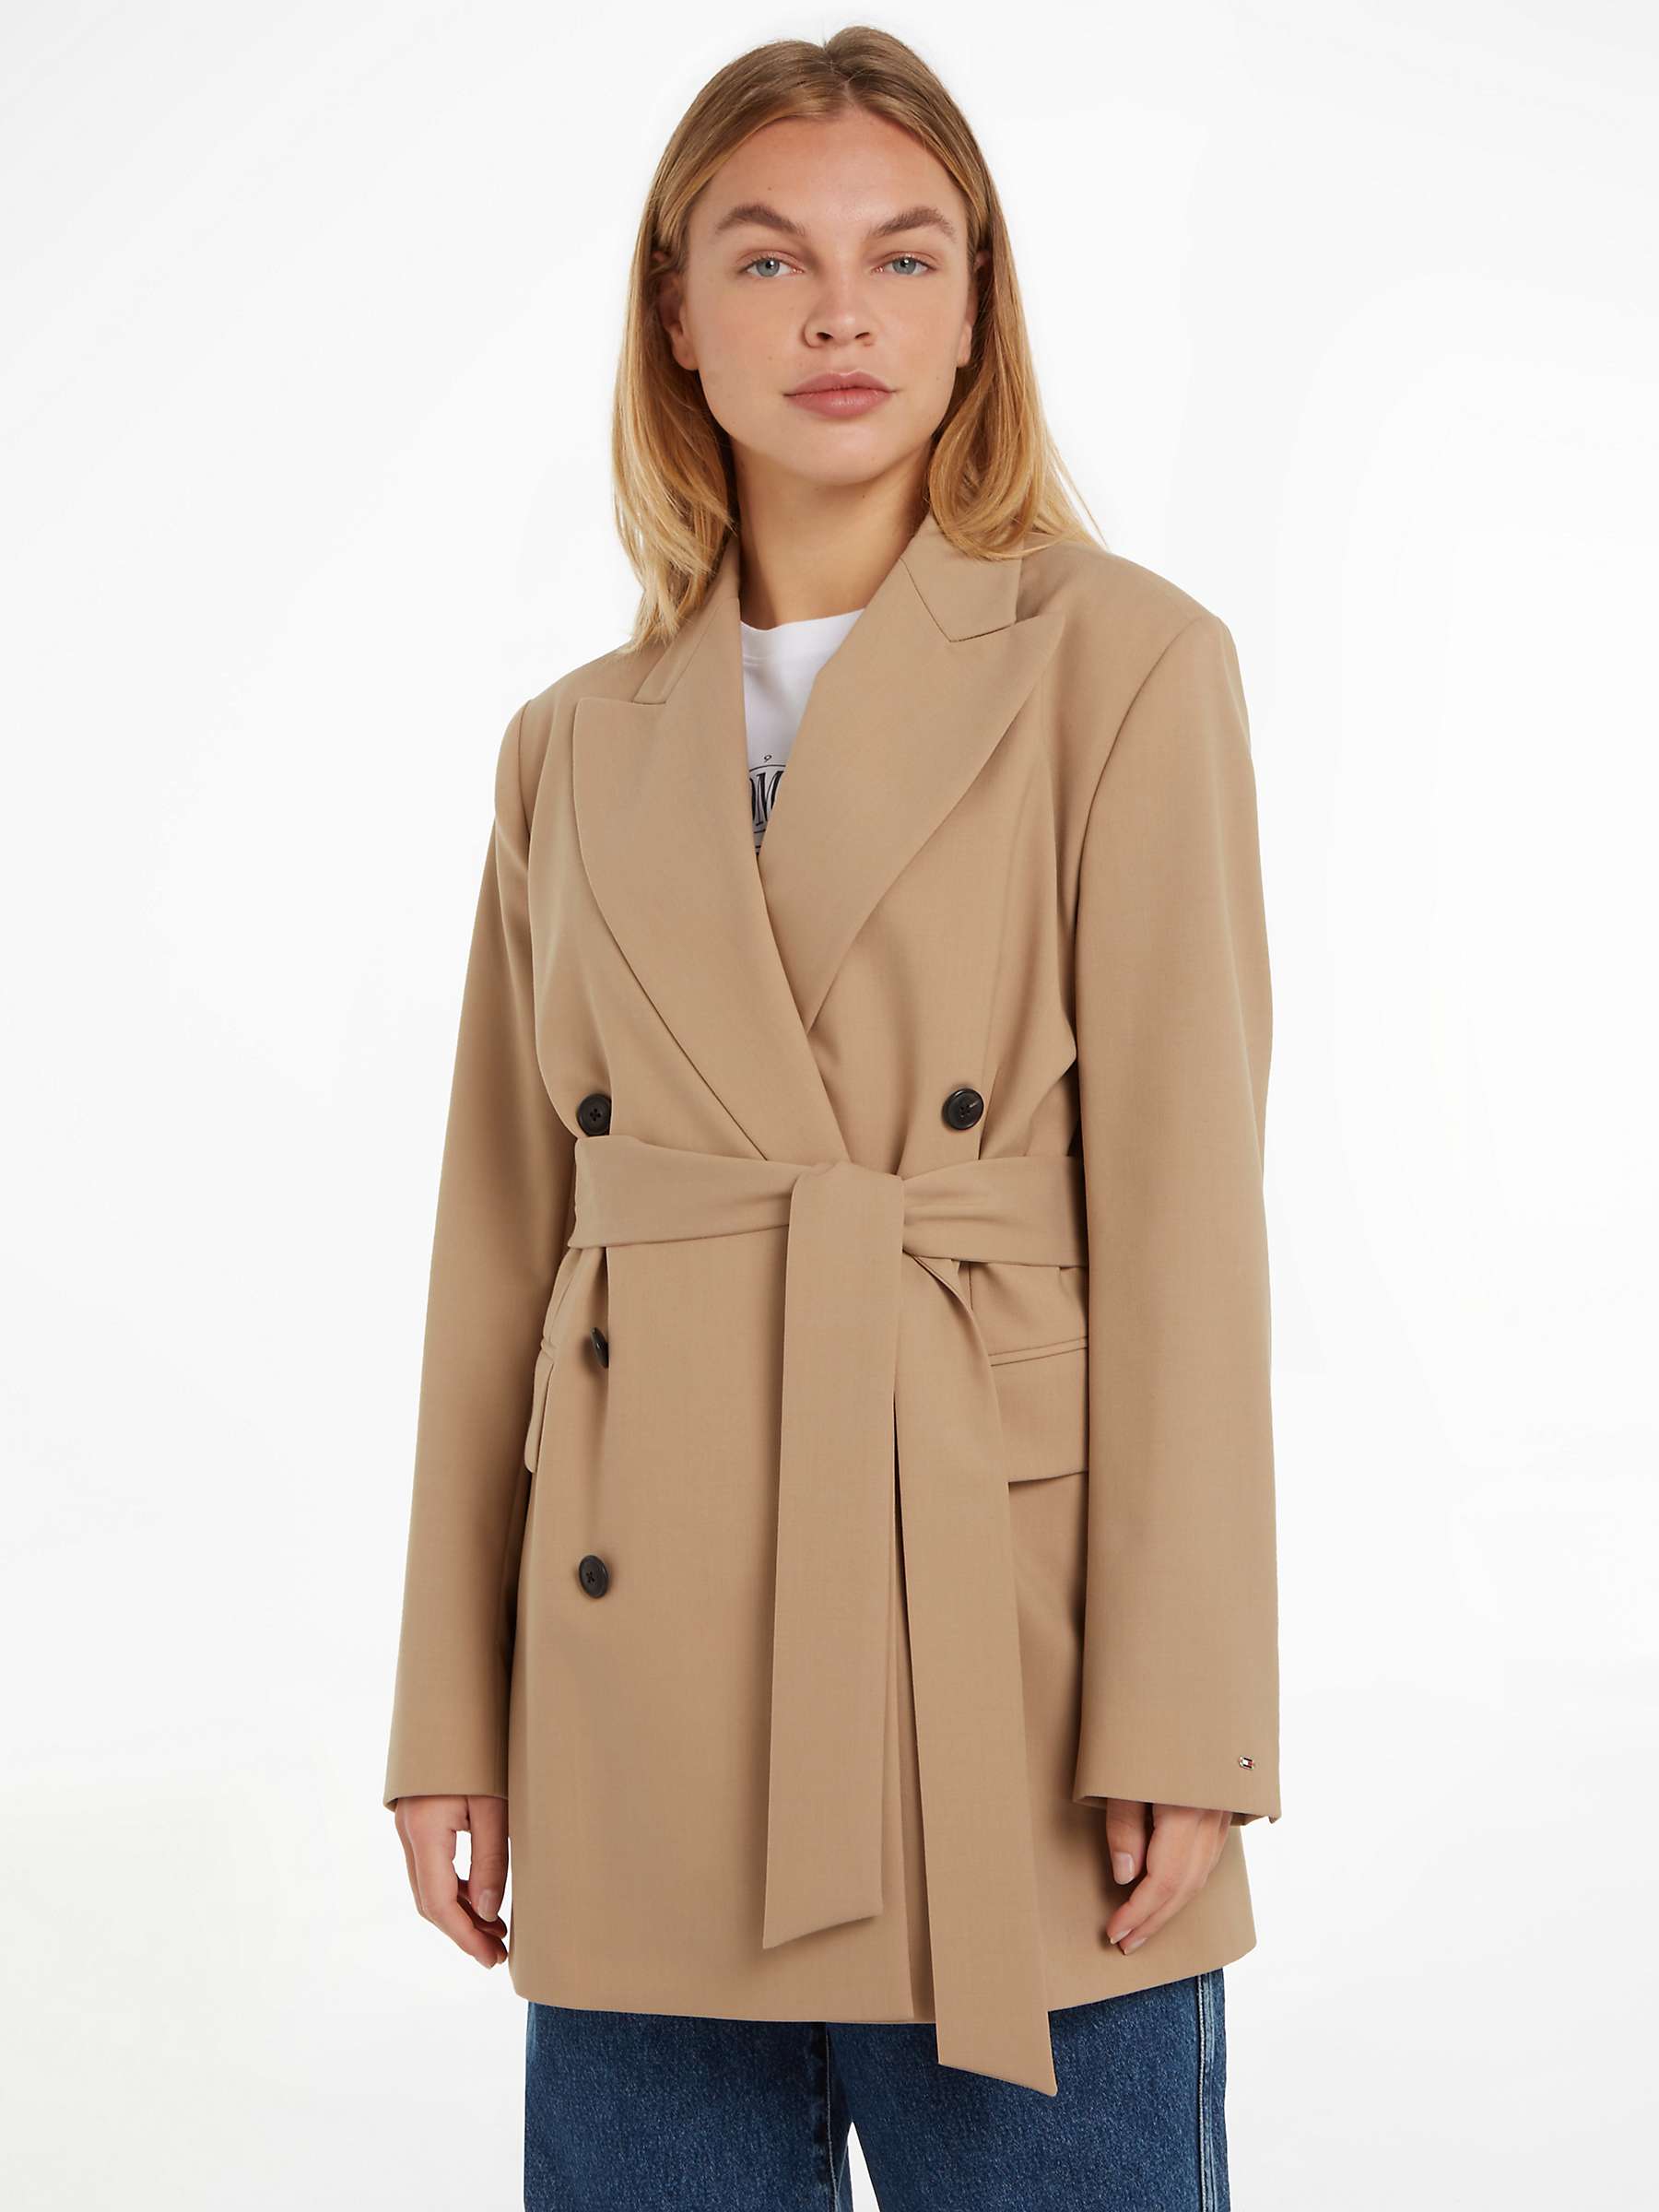 Buy Tommy Hilfiger Double Breasted Wool Blend Coat, Classic Beige Online at johnlewis.com